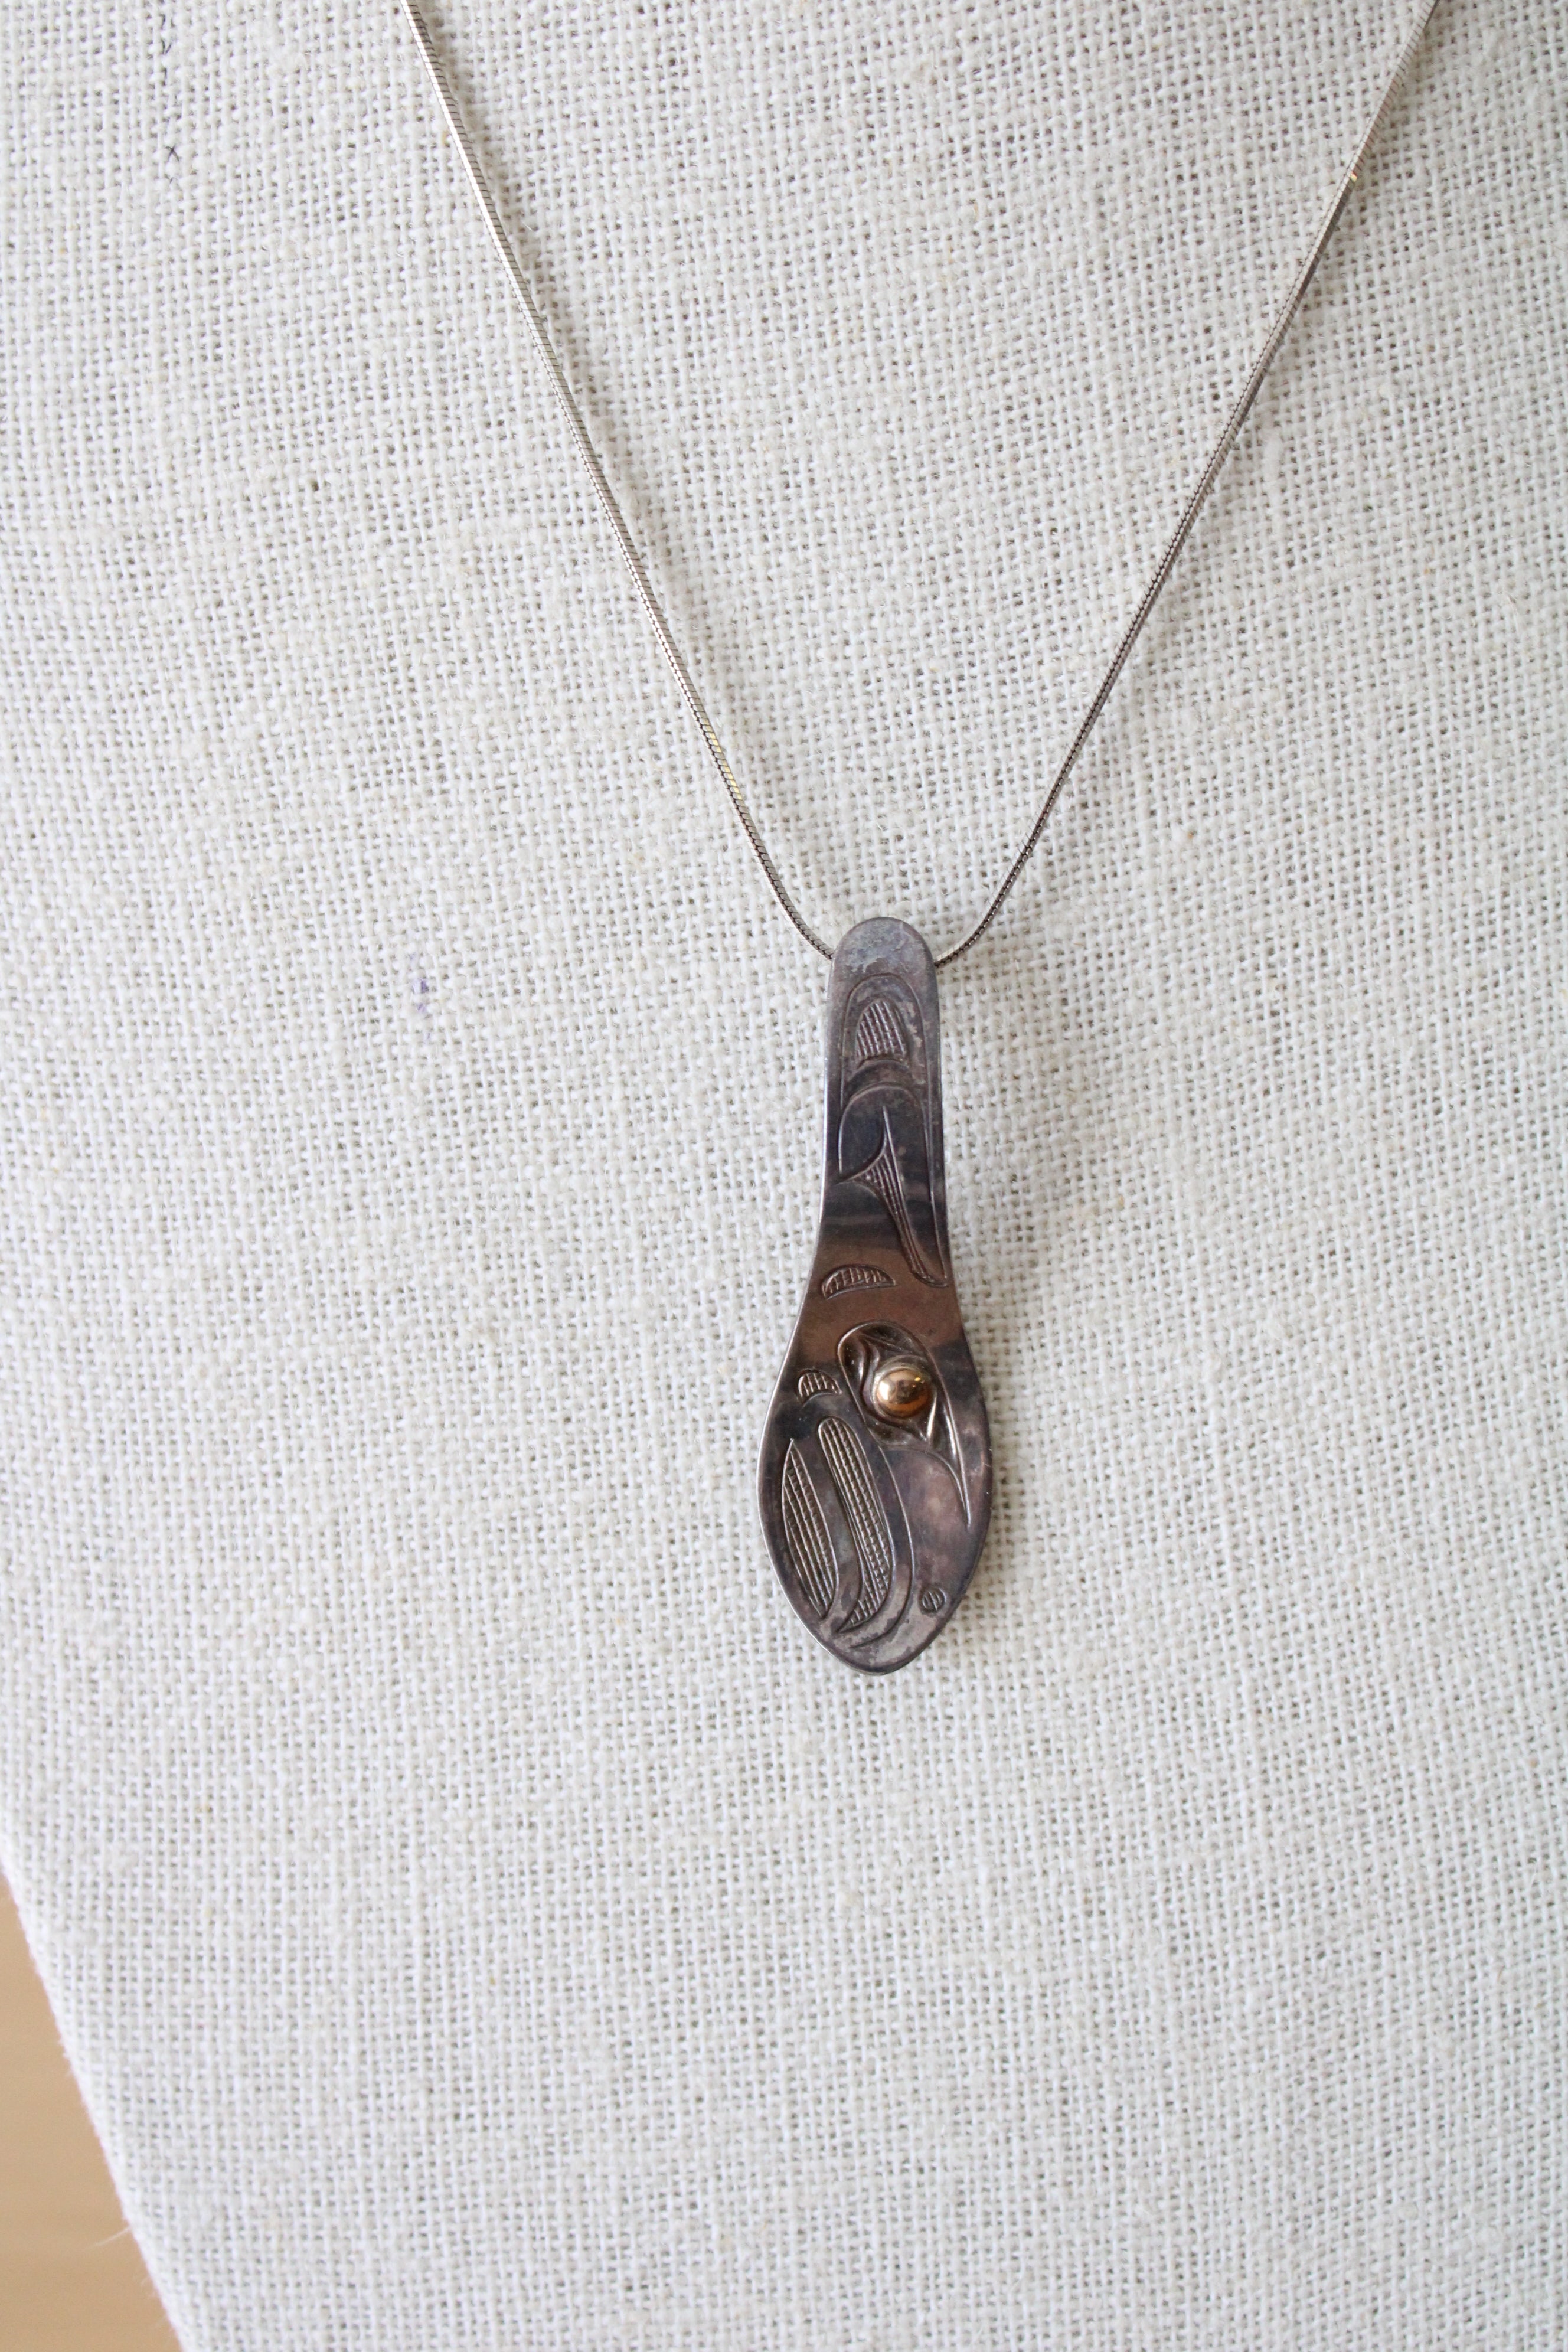 Silver Etched Spoon Native American Design Necklace